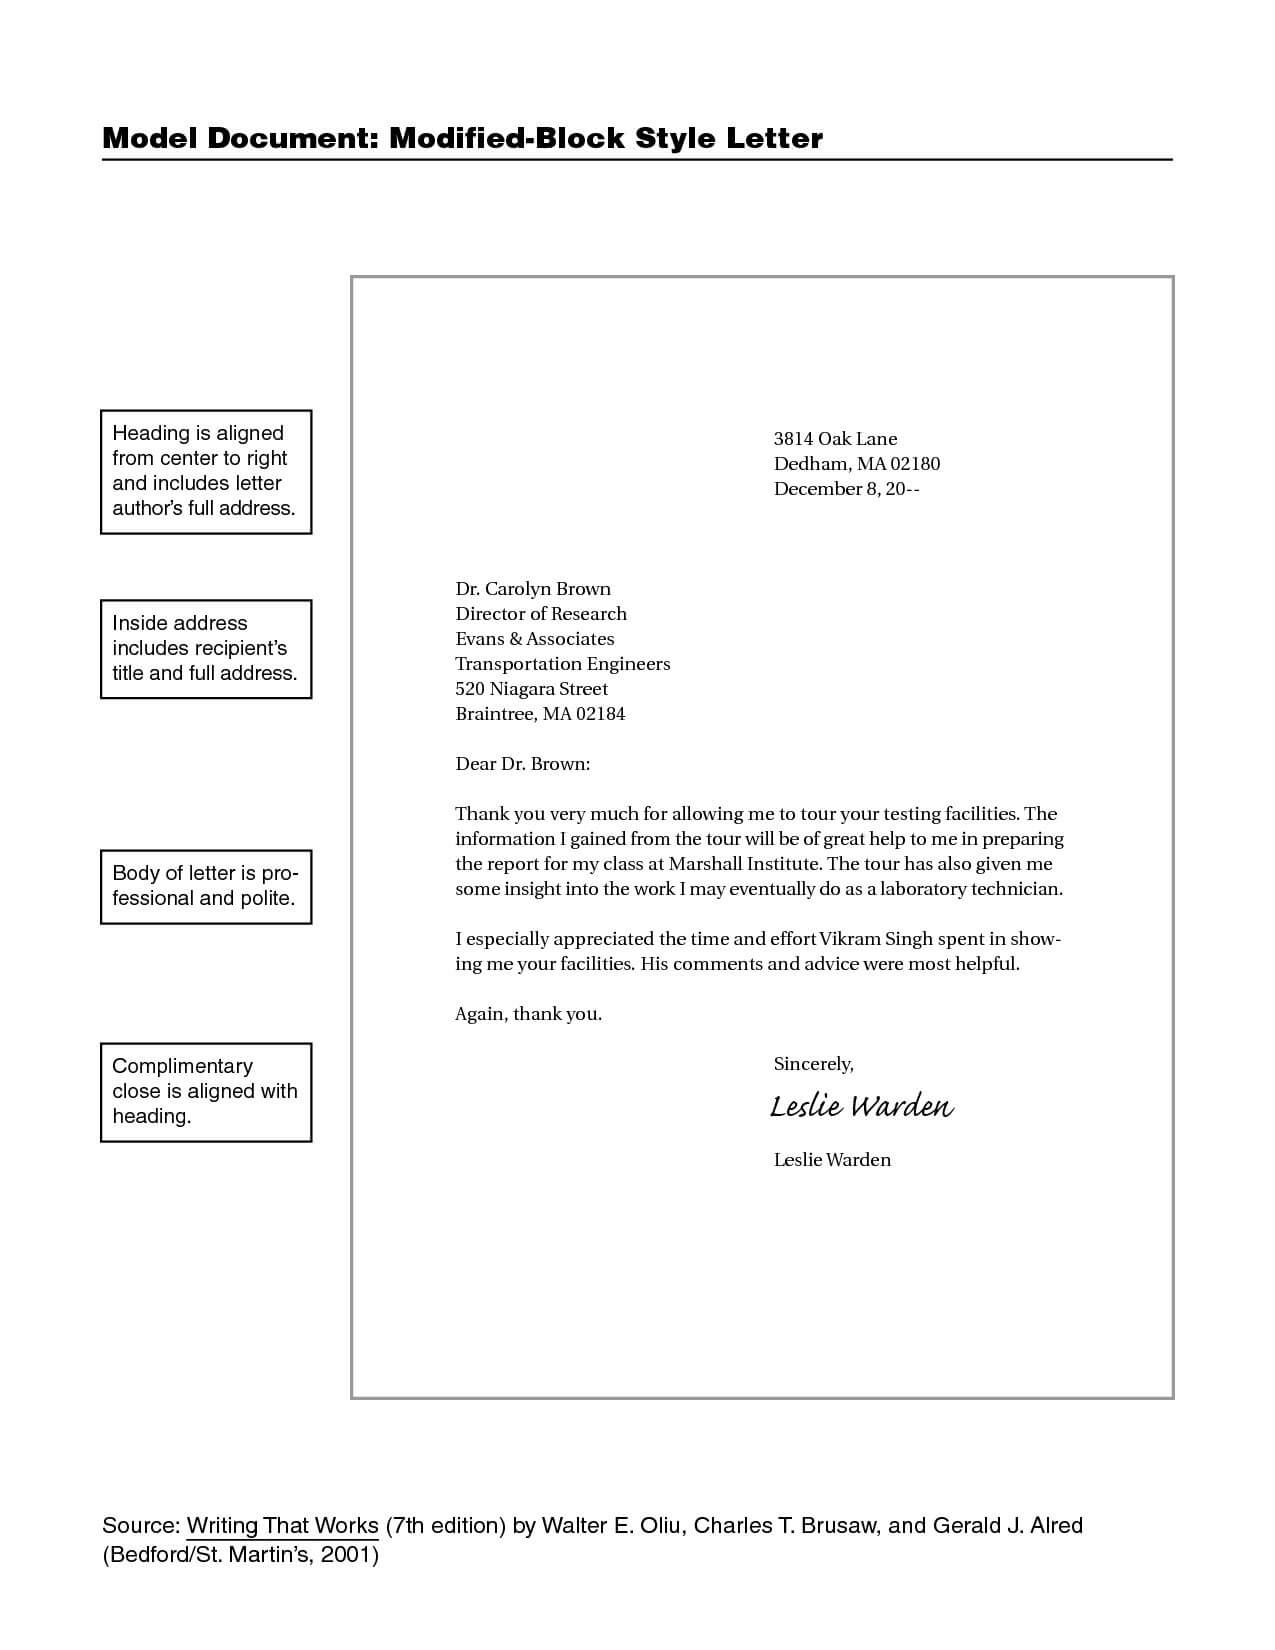 indented style application letter sample